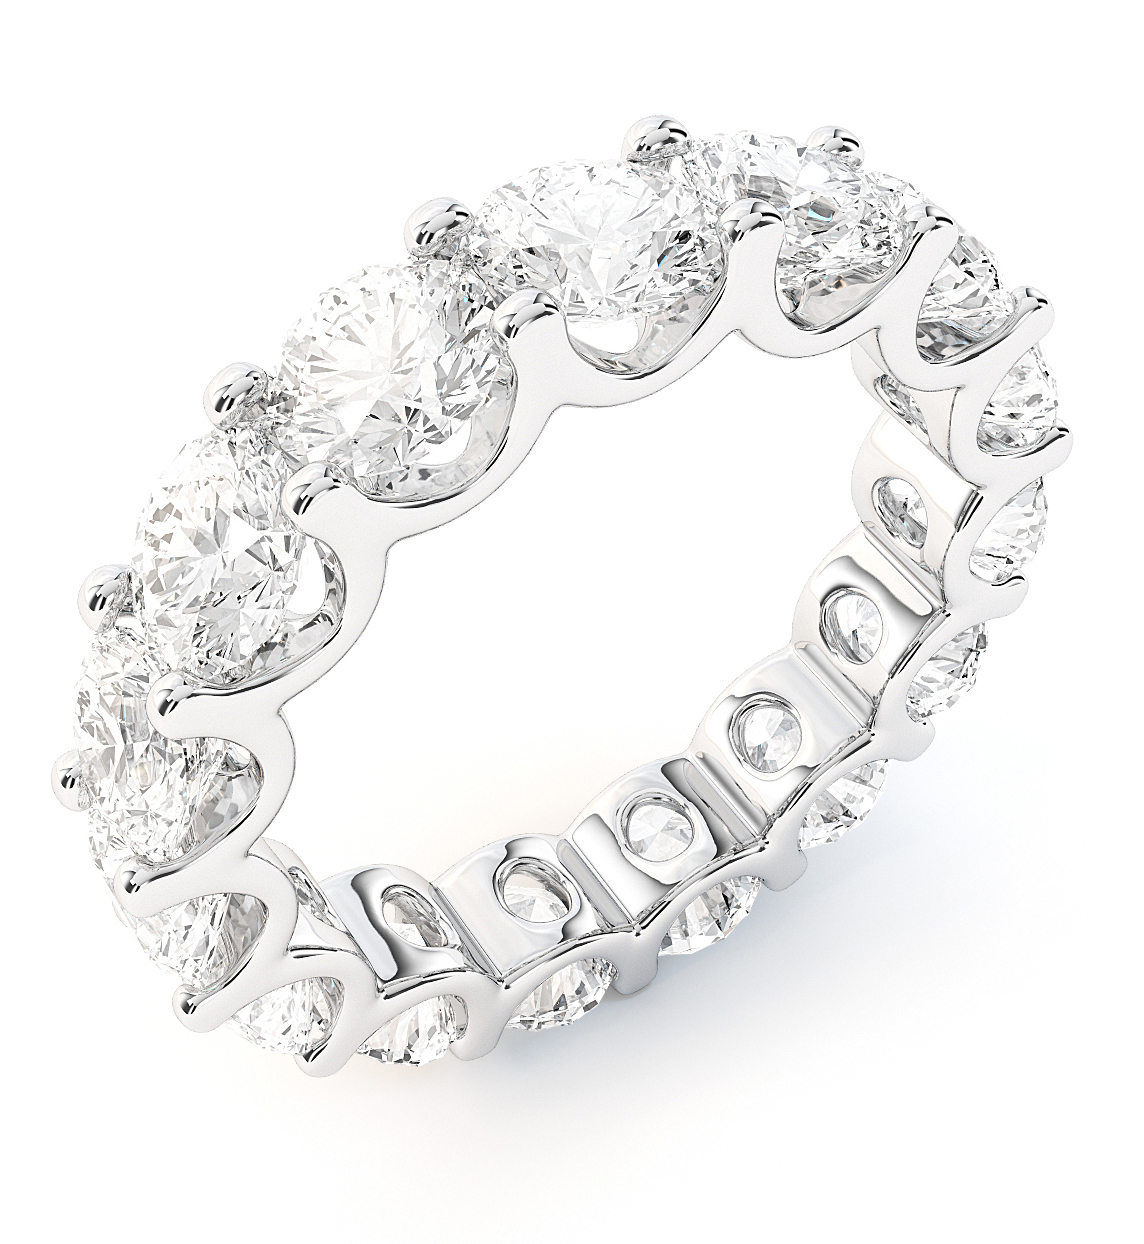 Diamond eternity ring with five round brilliant cut diamonds, created by 7cgi jewelry rendering service.